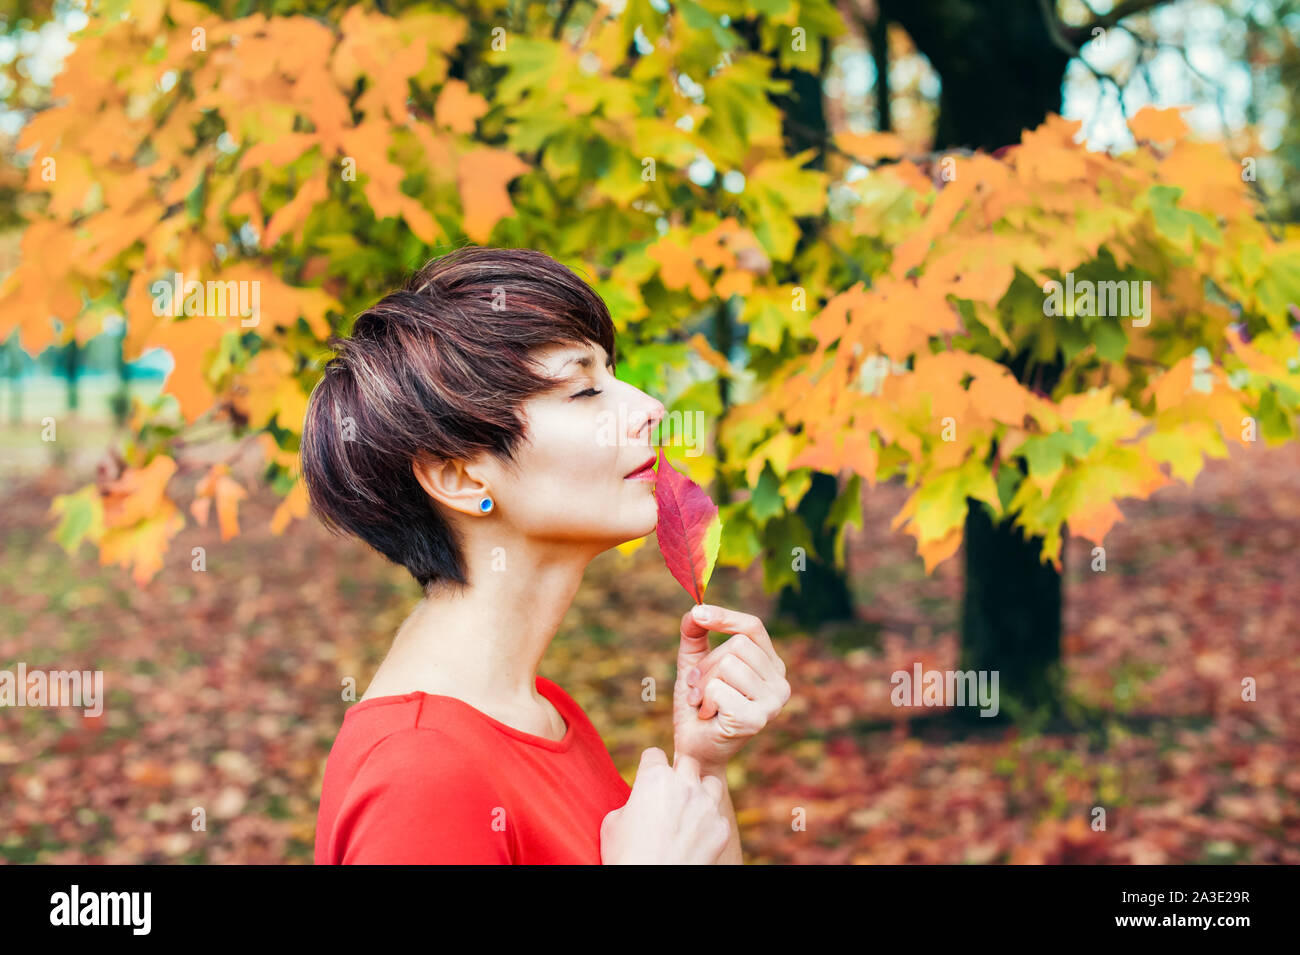 Autumn romantic Beauty. Portrait of Cute Woman in red dress with Fall Leaves in the Park Outdoors in Sunny Day. Seasonal dreamy mood. Copy space Stock Photo